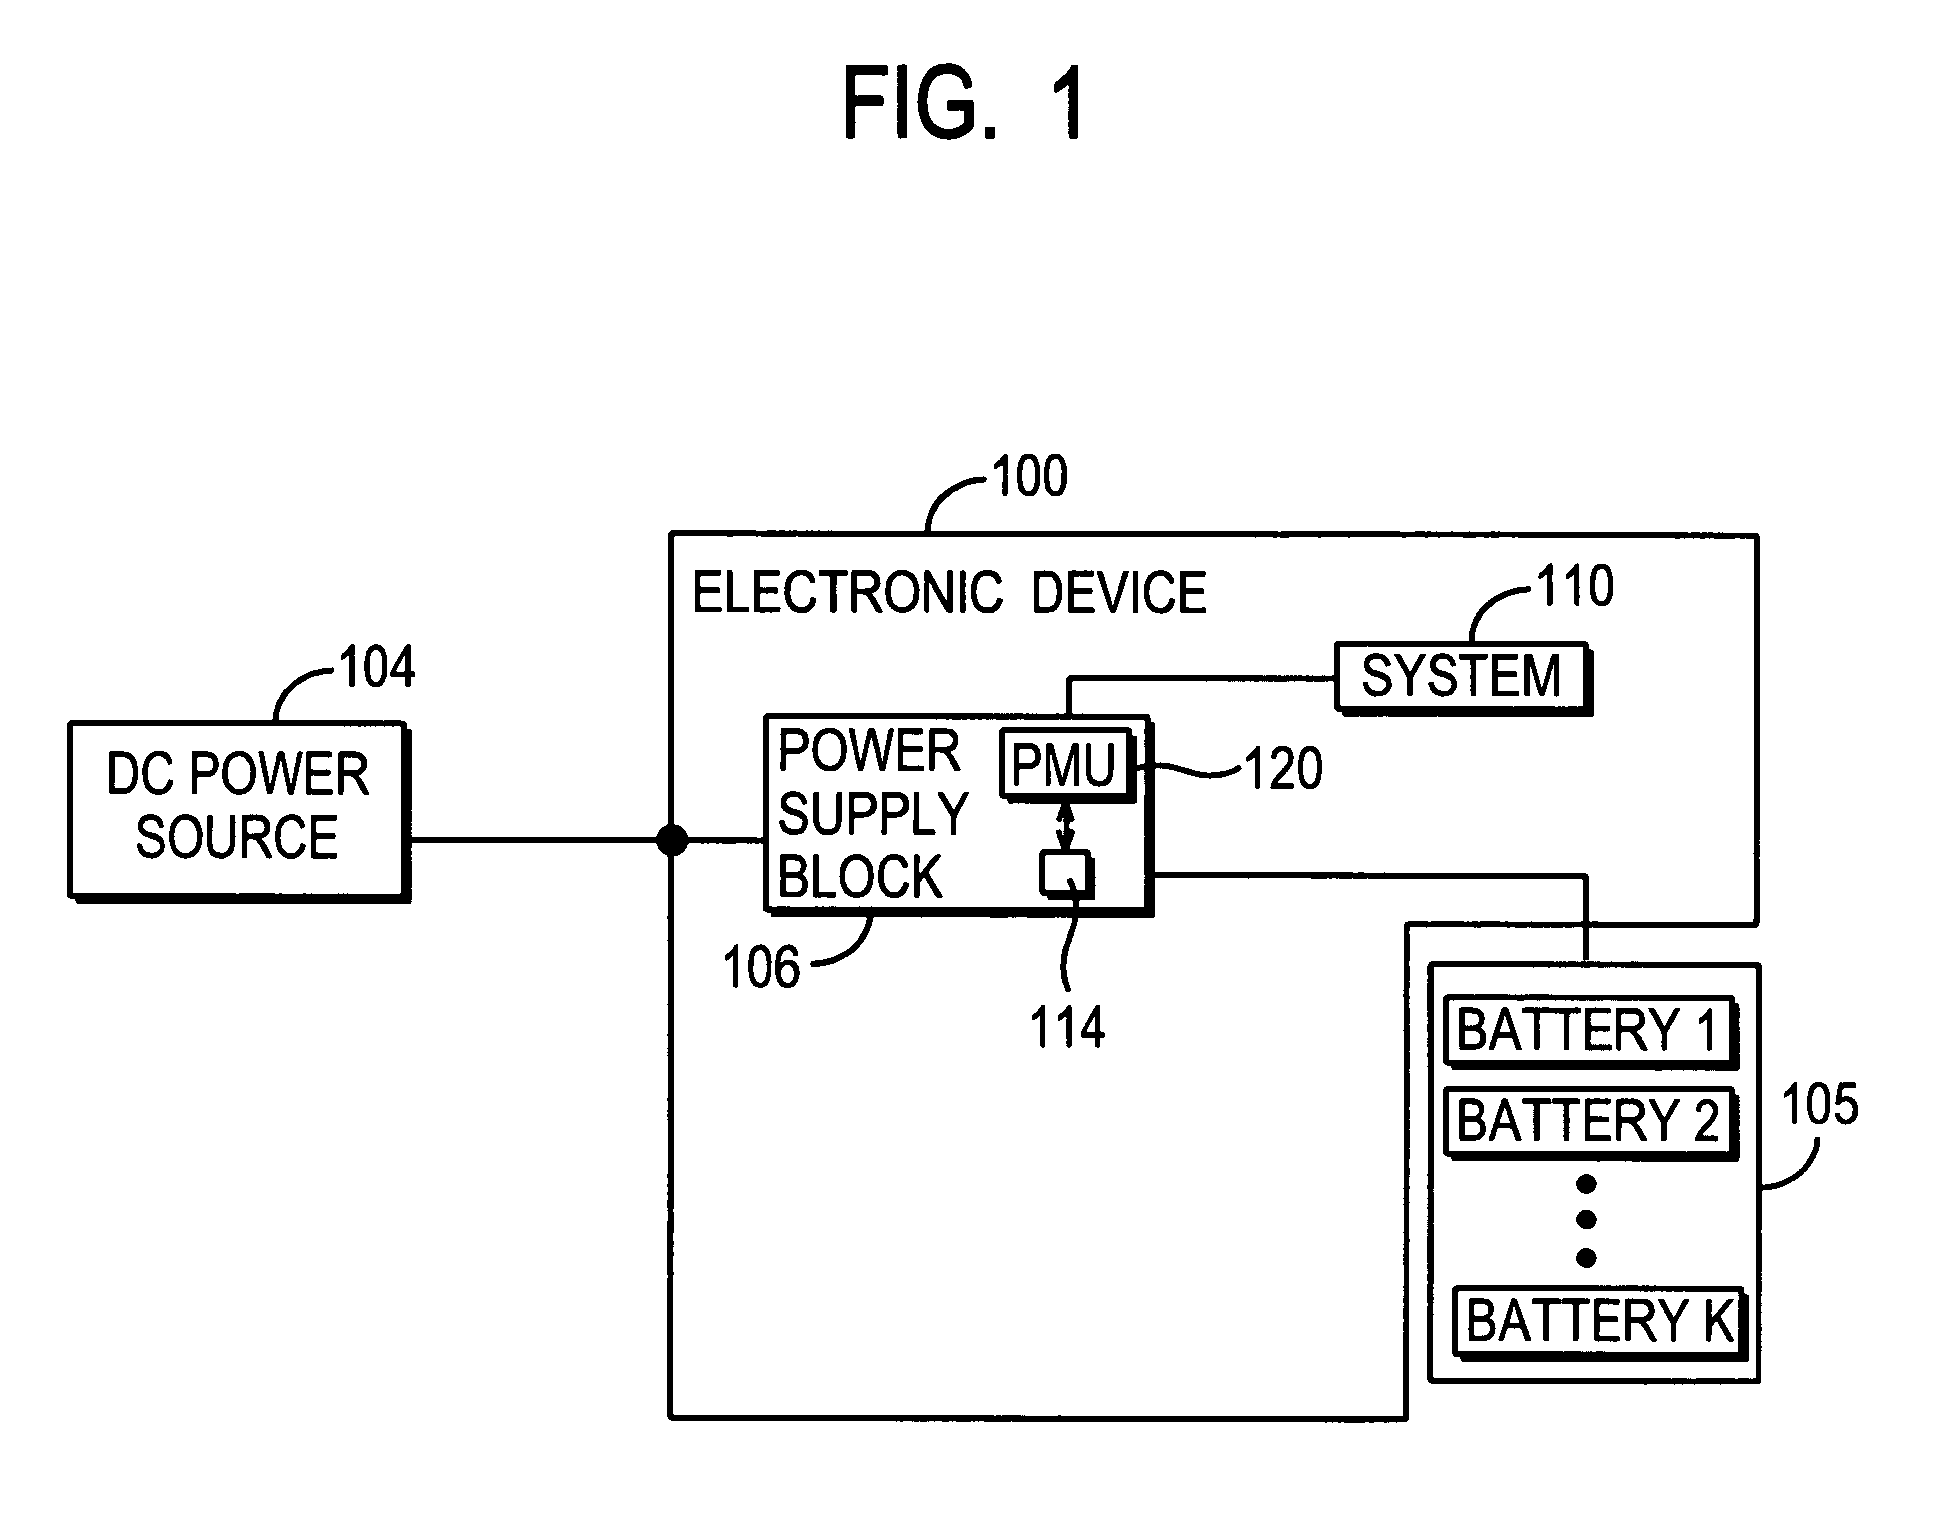 Charging circuit for parallel charging in multiple battery systems